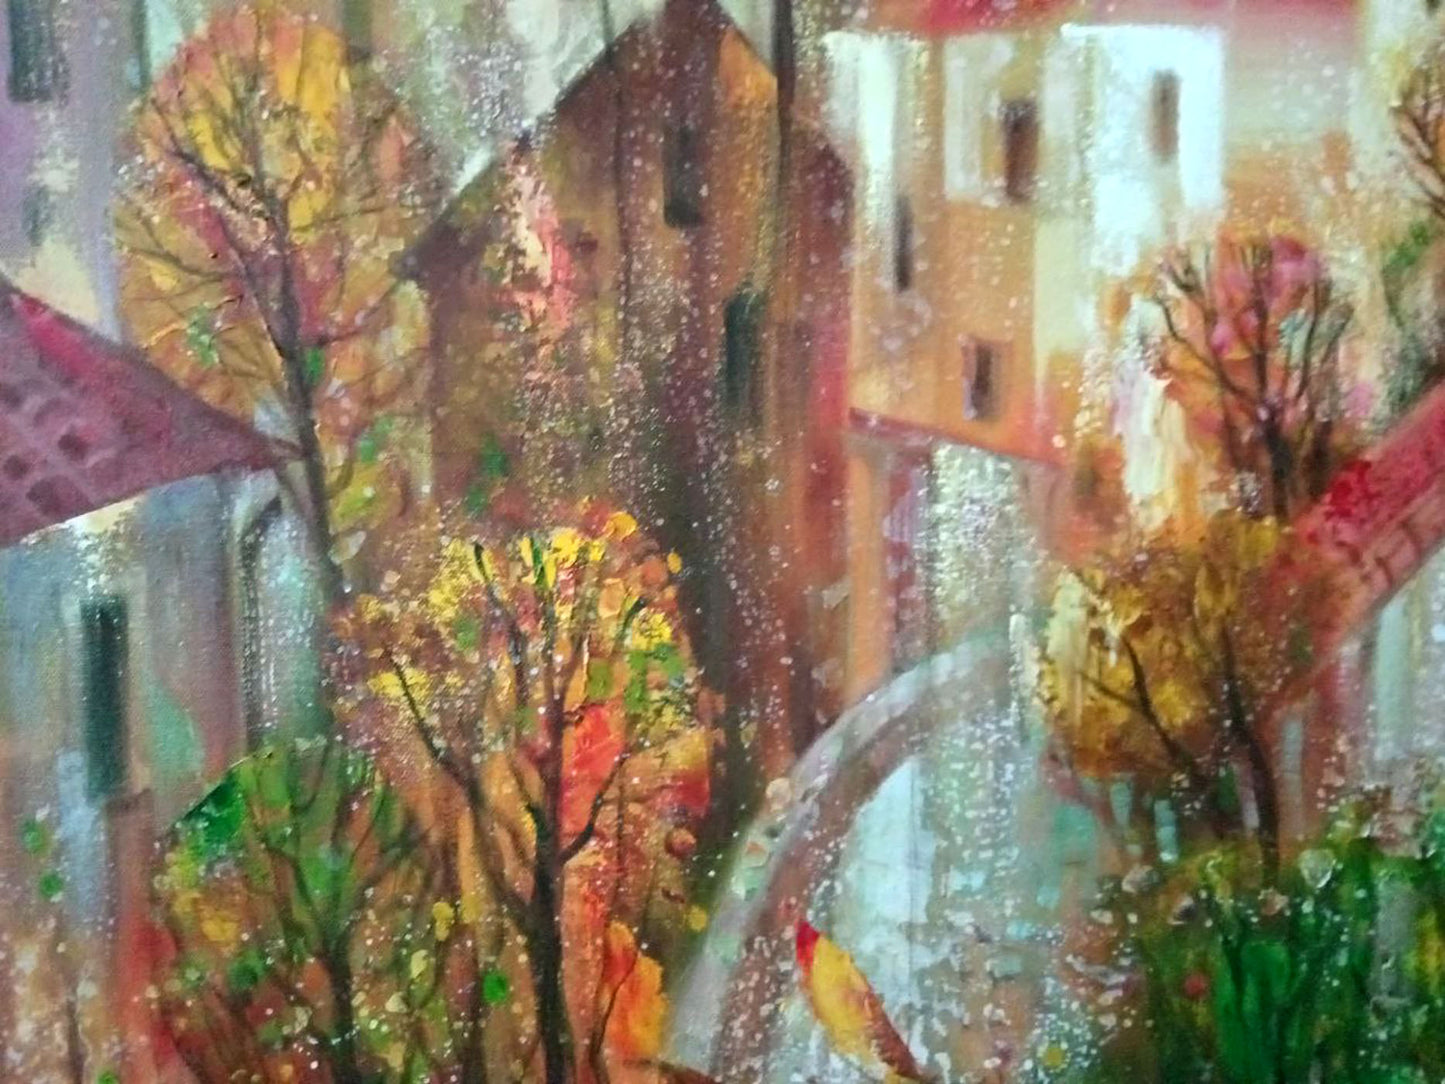 Autumn in the City by Borisovich Tarabanov, an abstract oil painting with urban and fall elements.